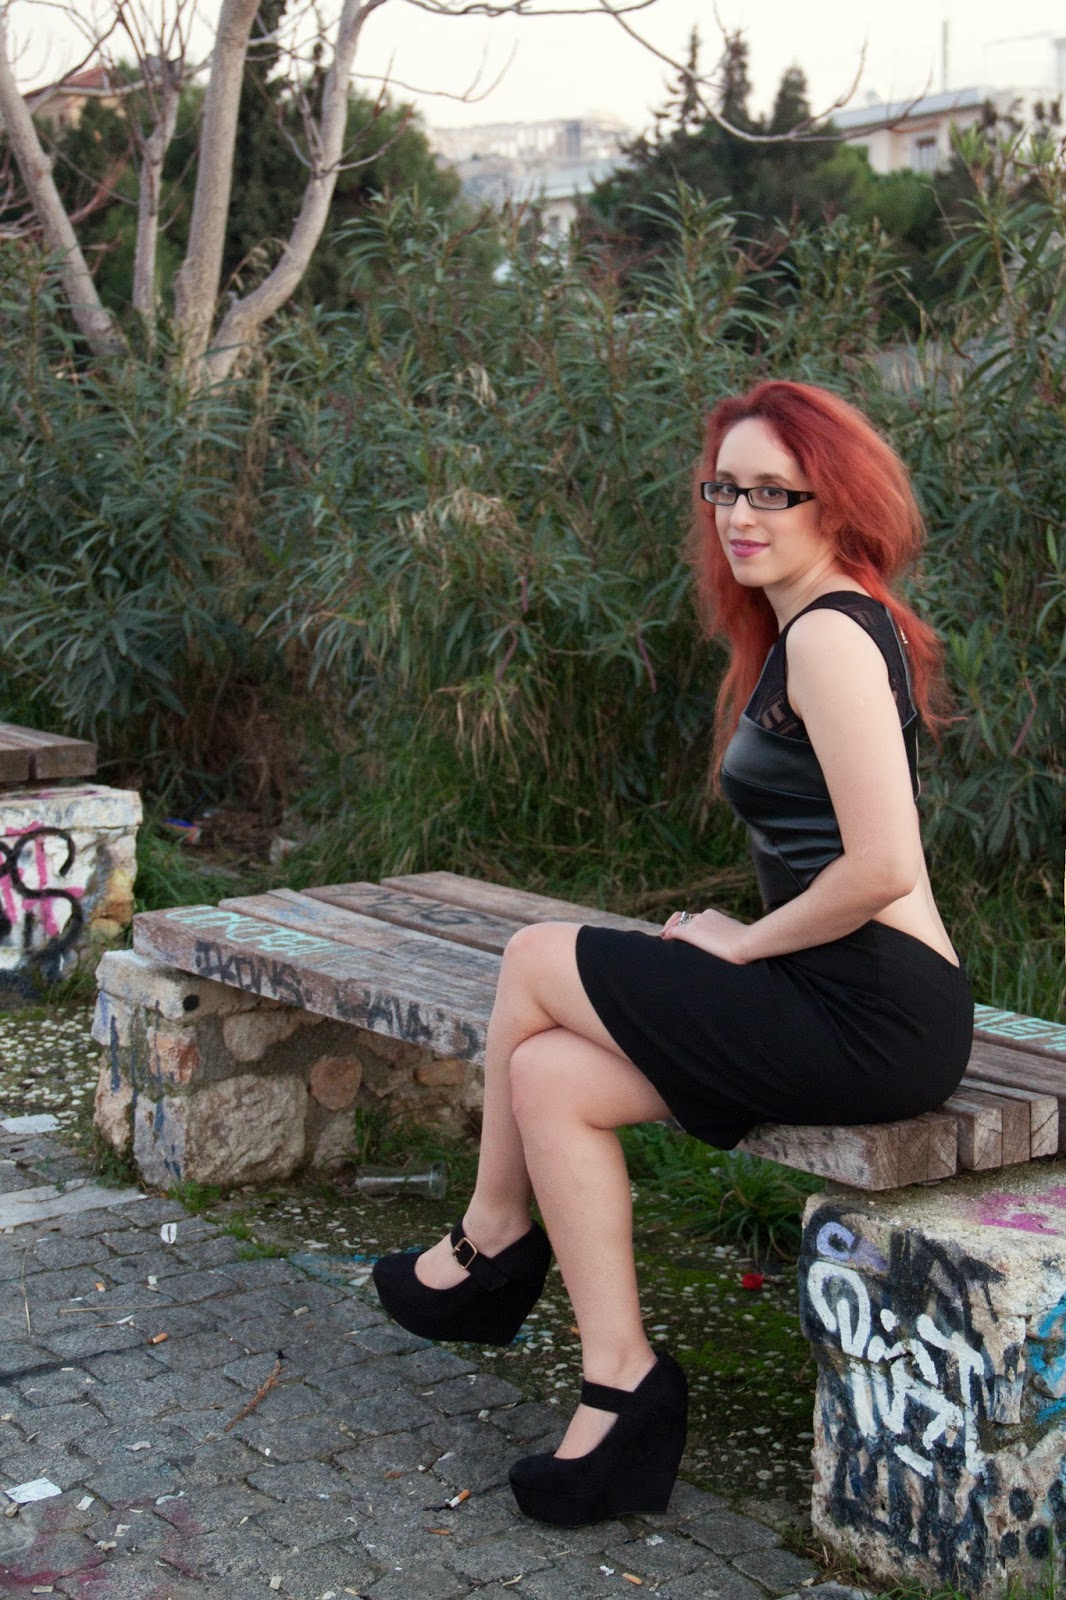 Anna, Keni, etailpr, hybrid, dress, backless, leather, lace, black, redhead, spotlights on the redhead, model, blogger, sexy, review, shopping, glasses